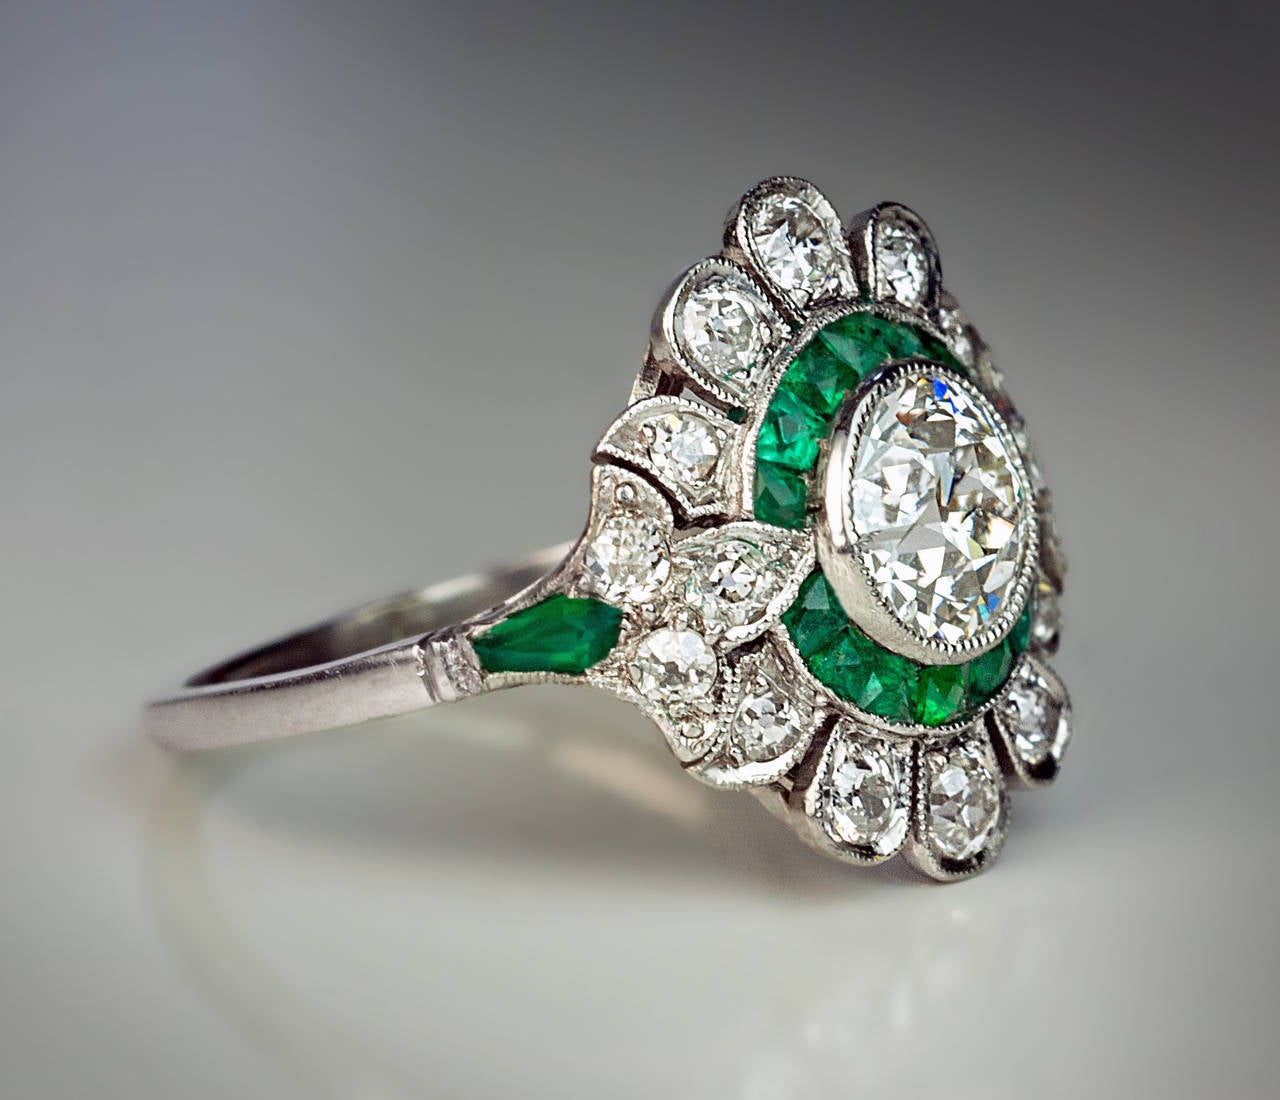 18K white gold designed as a stylized flower head flanked by fleur-de-lis shoulders, centered with an old European cut diamond (6.1-3.85 mm, approximately 1 carat) surrounded by calibre cut emeralds, estimated total diamond weight 1.34 ct

Marked